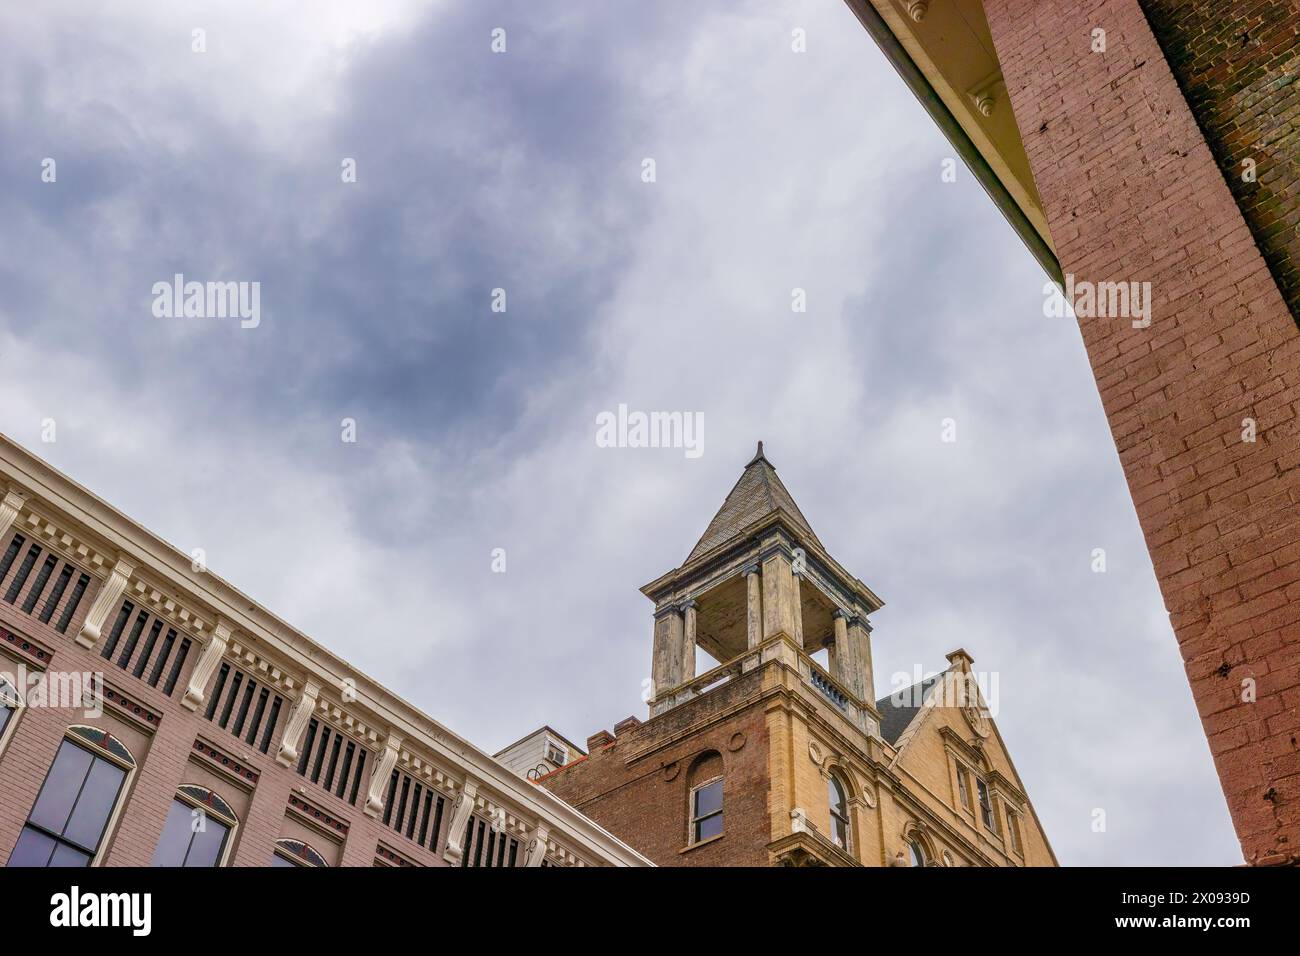 View of an empty tower of church in historical downtown Staunton, Virginia, USA incorporated in 1801 Stock Photo